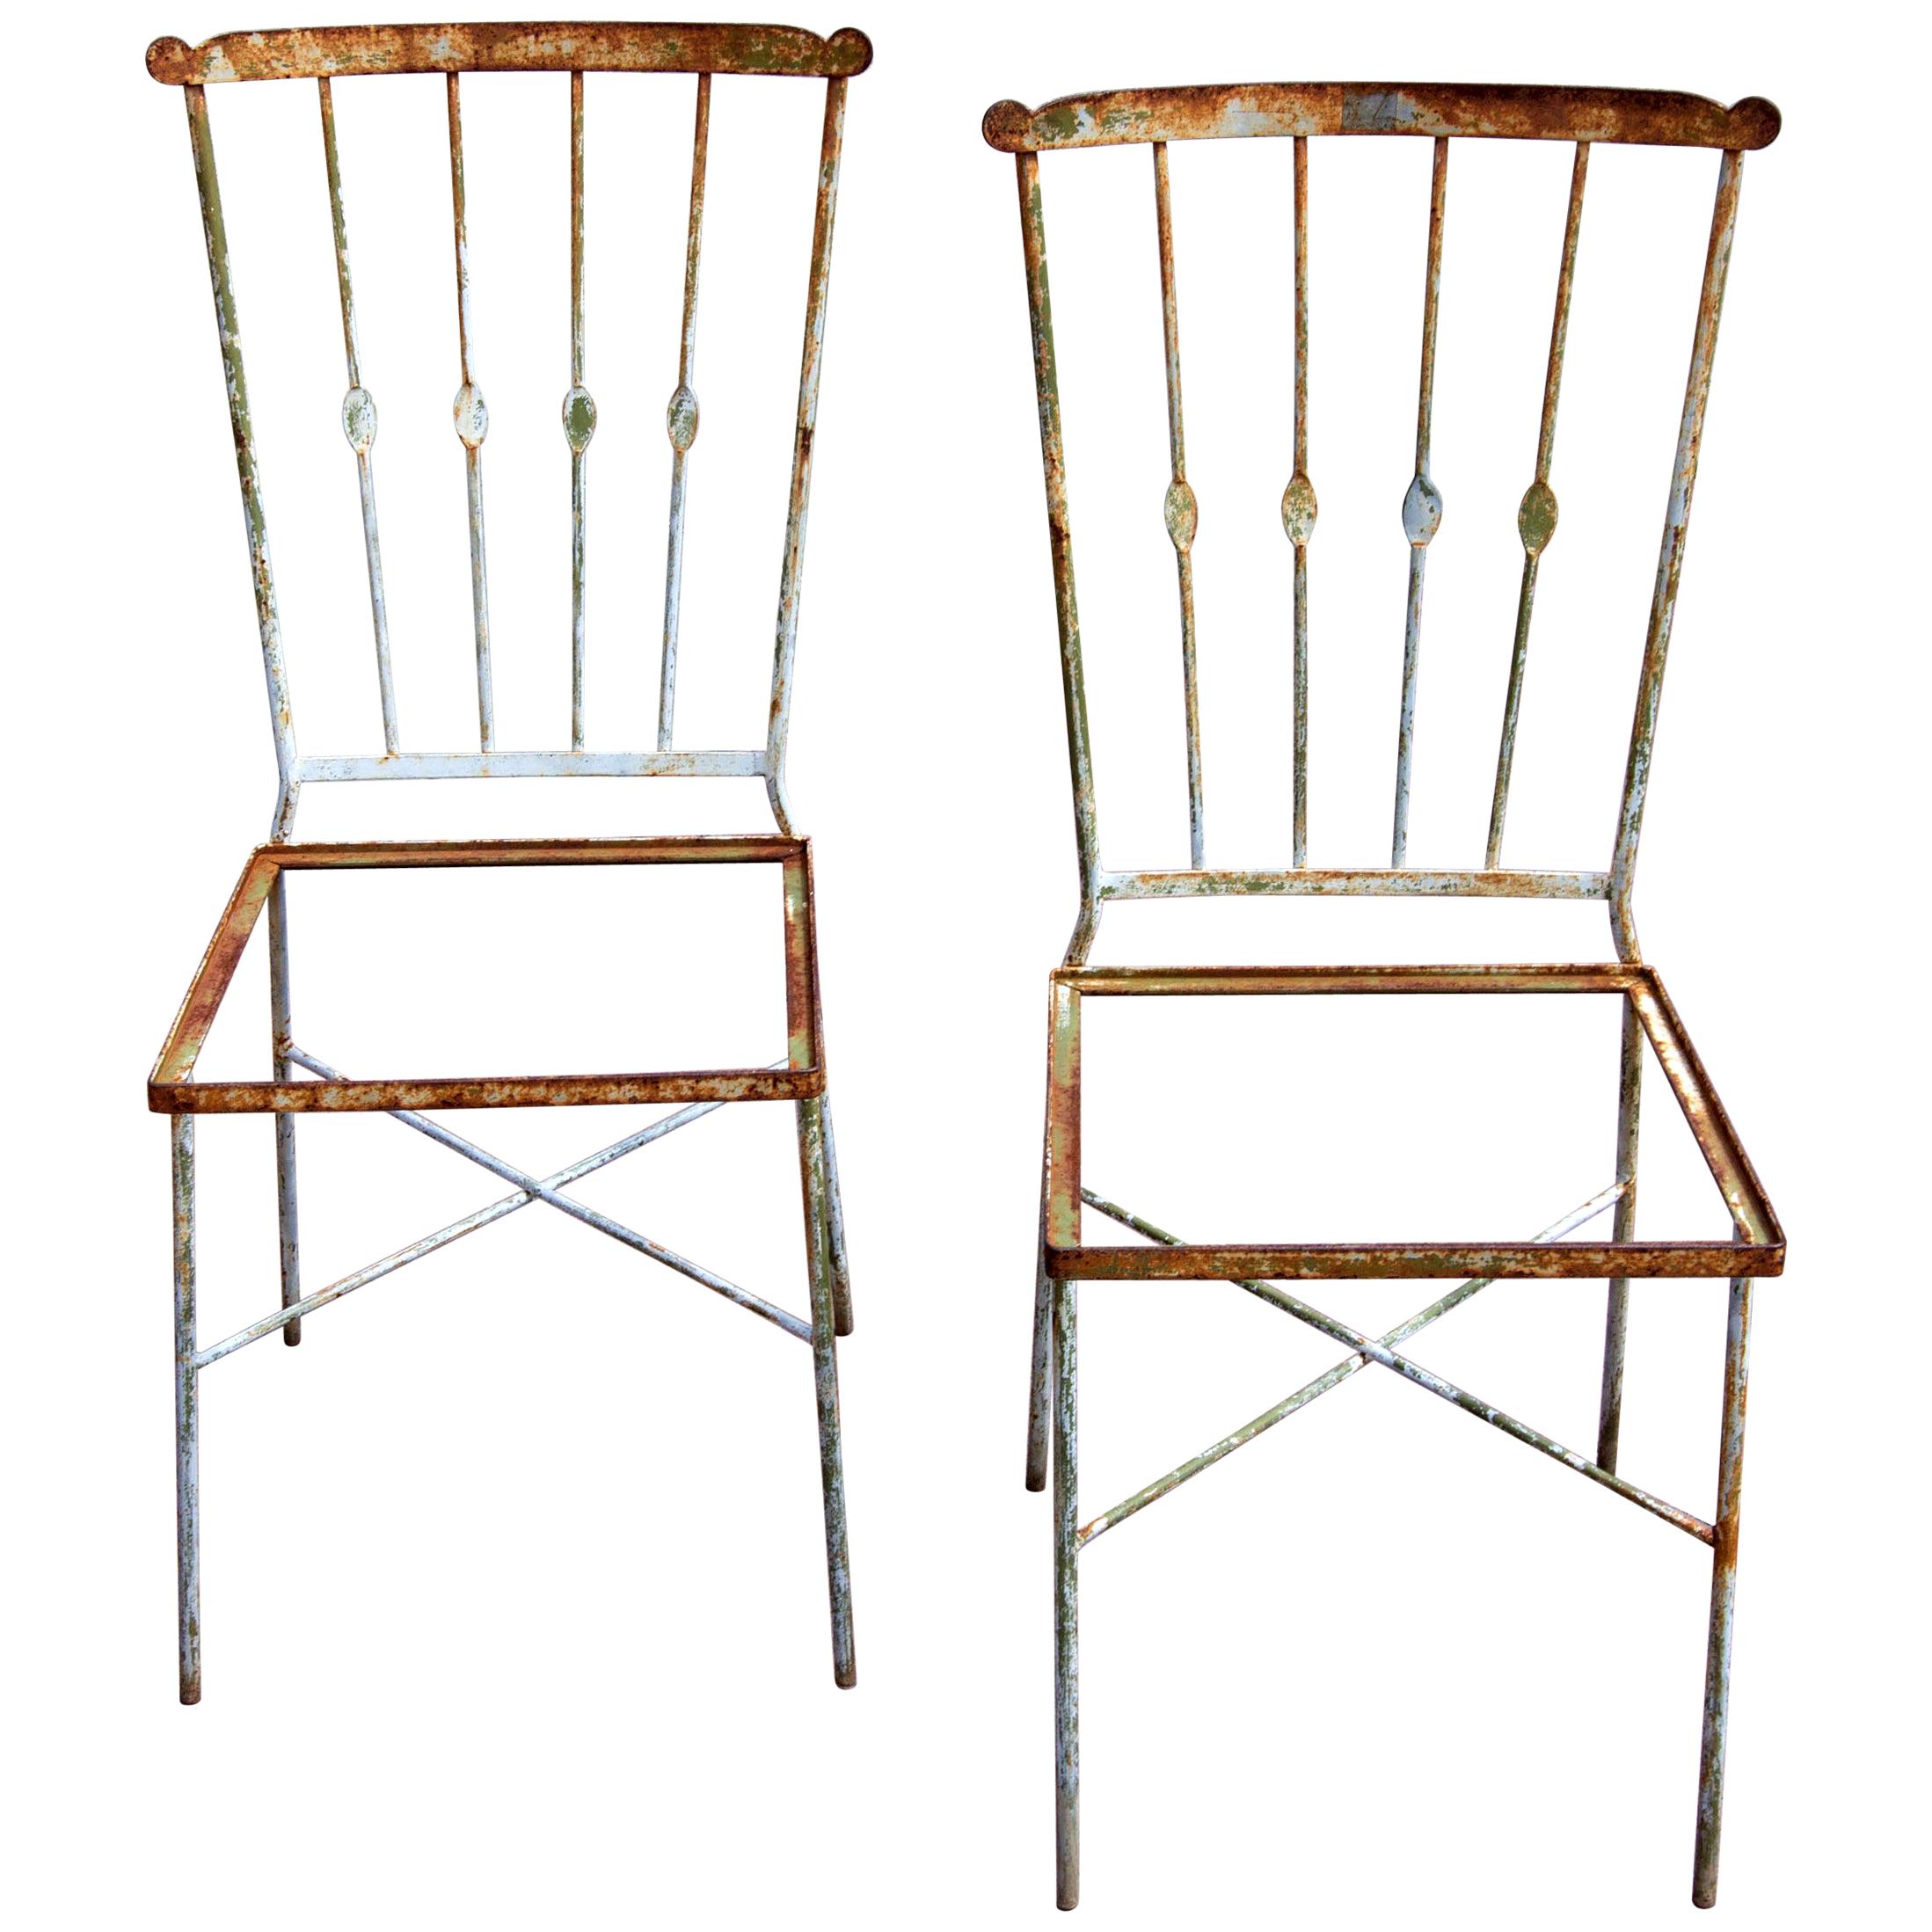 Pair of Wrought Iron Garden Chairs